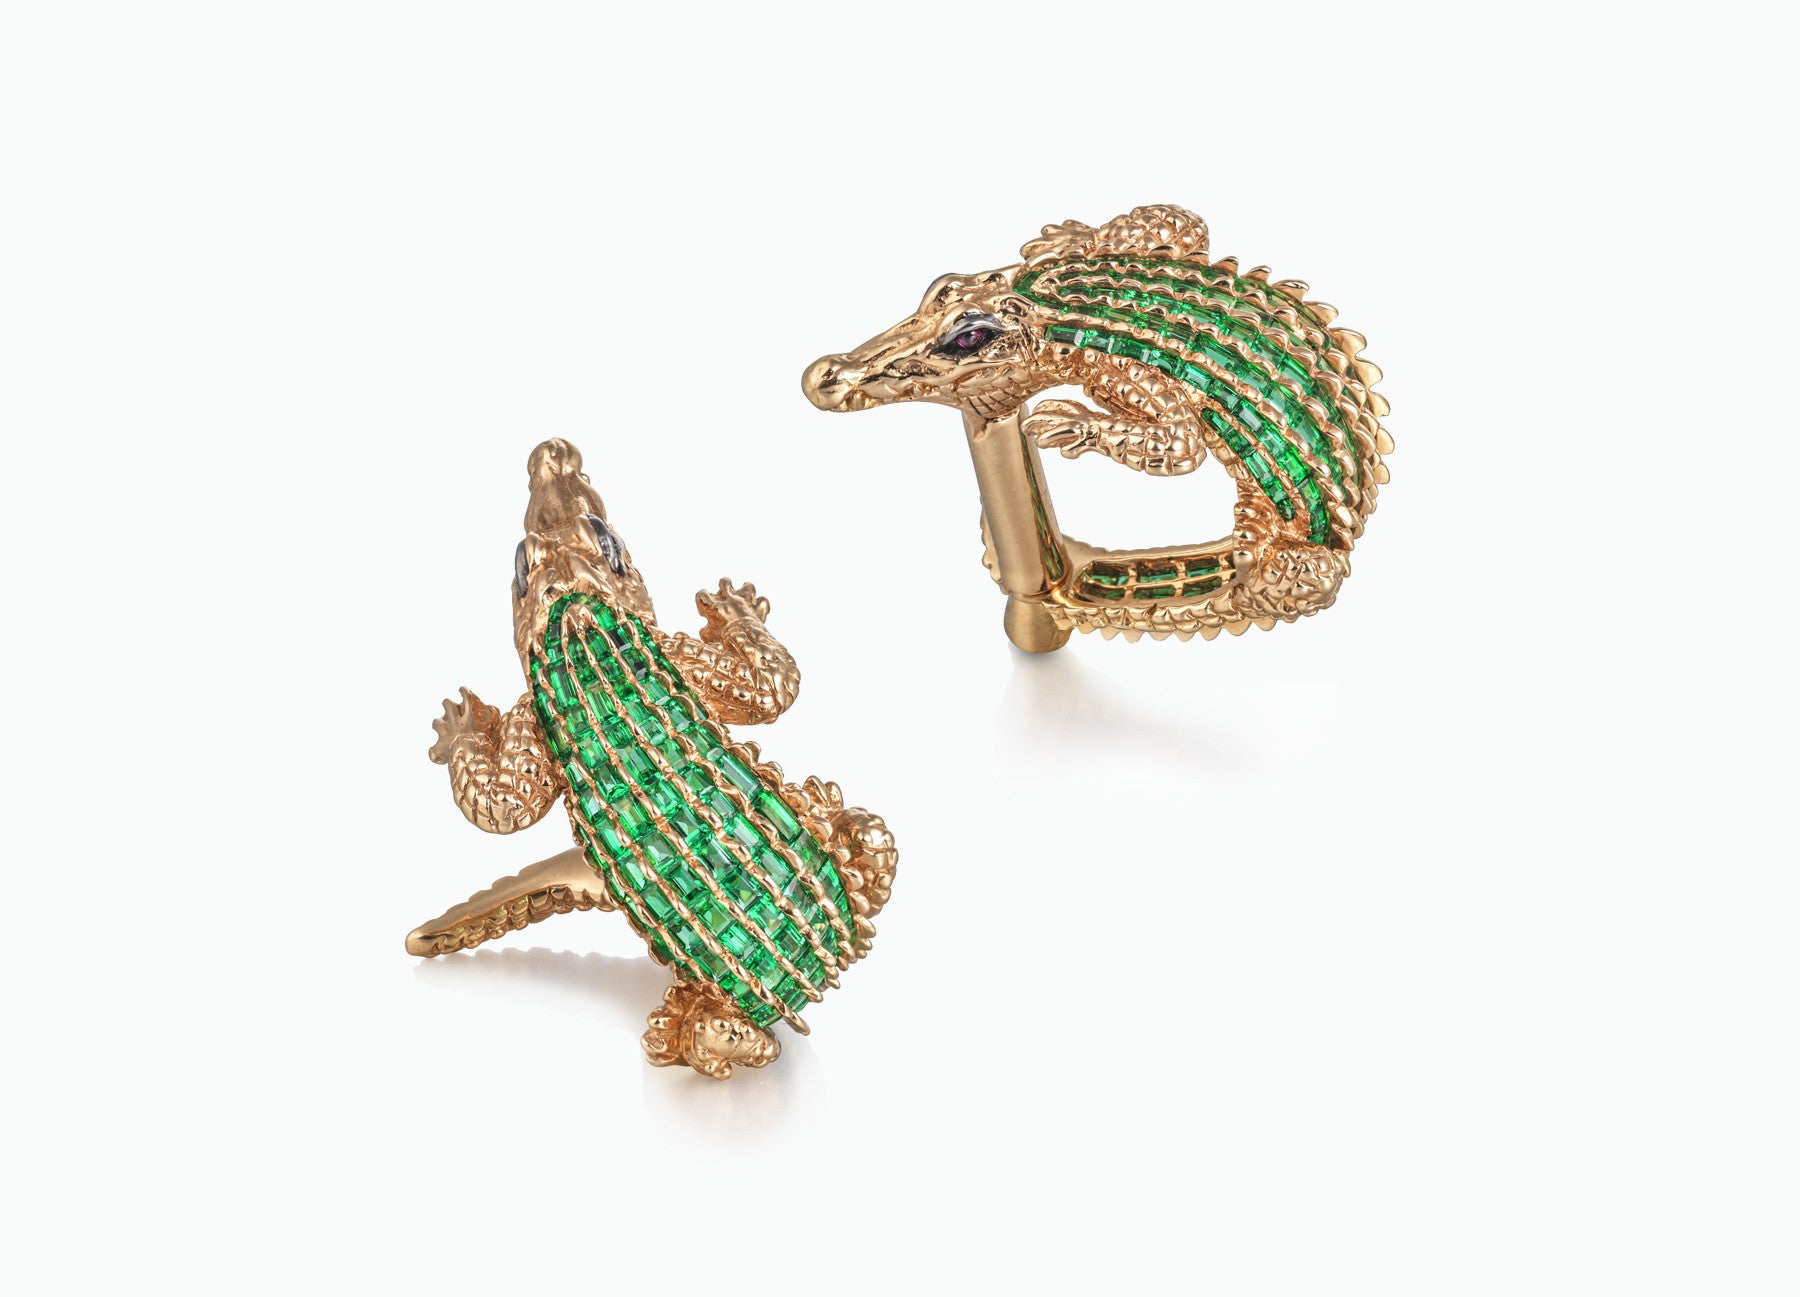 ONE OF A KIND CROCODILE CUFFLINKS IN 18k Yellow gold set with 4 carats of baguette cut emeralds and two rubies